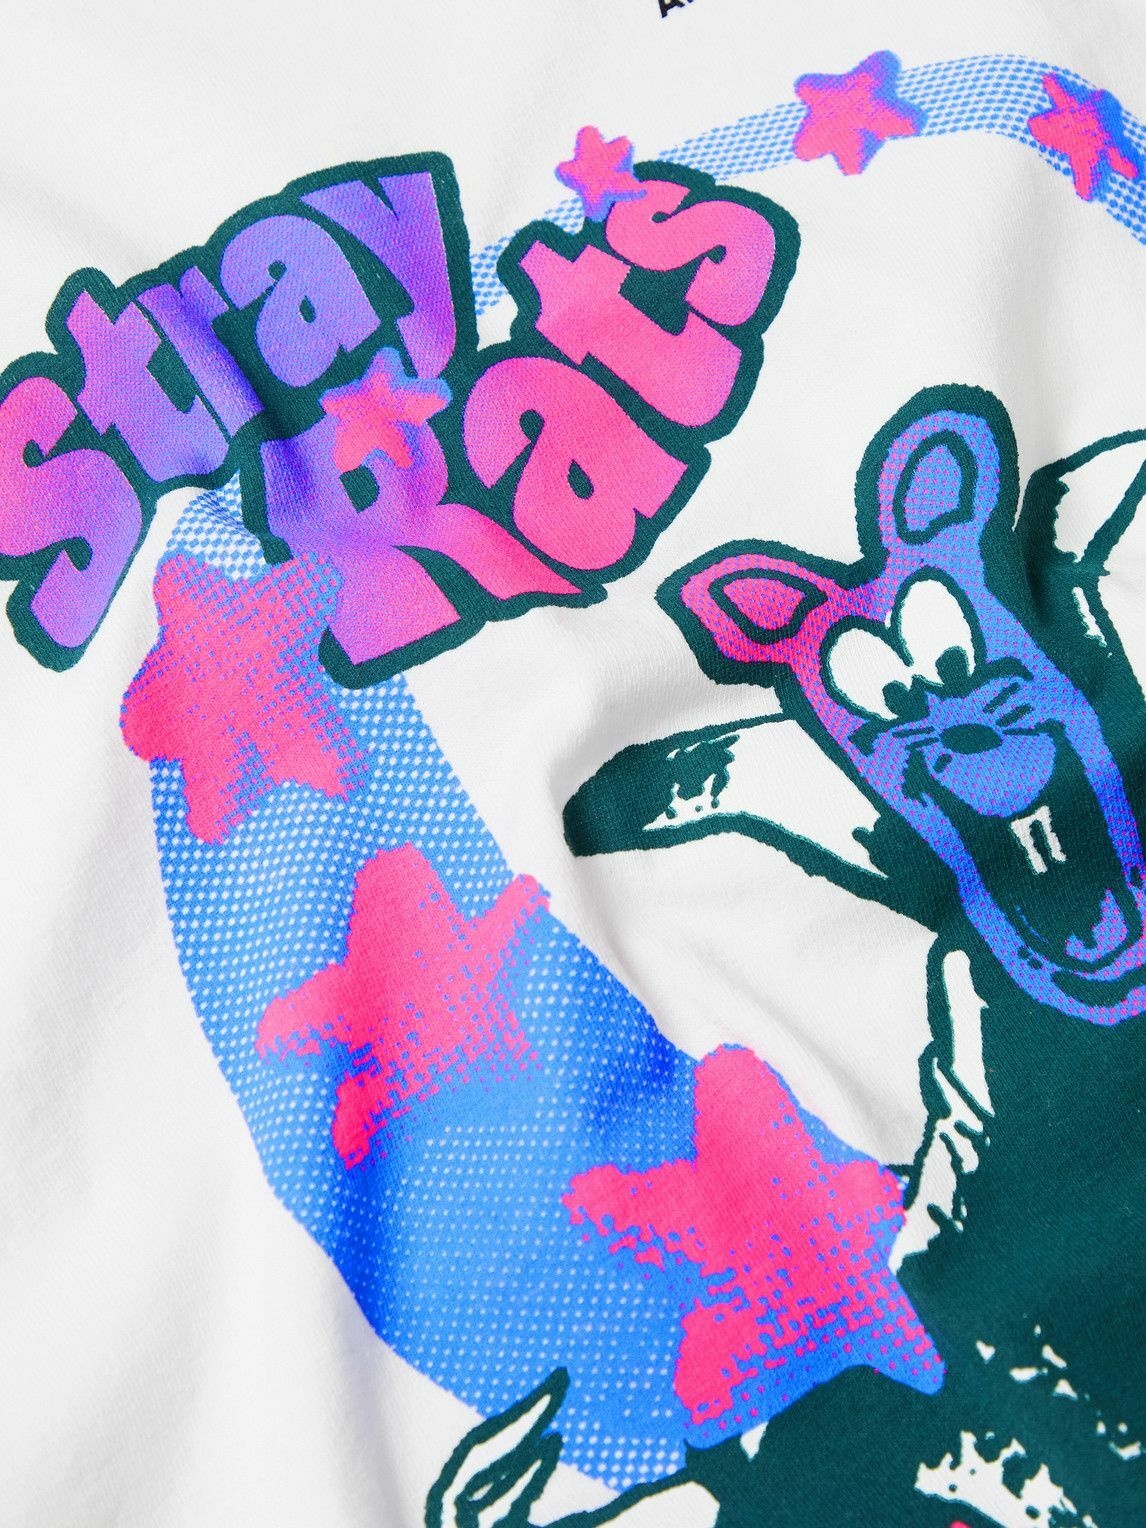 Stray Rats - Cereal Printed Cotton-Jersey T-Shirt - White